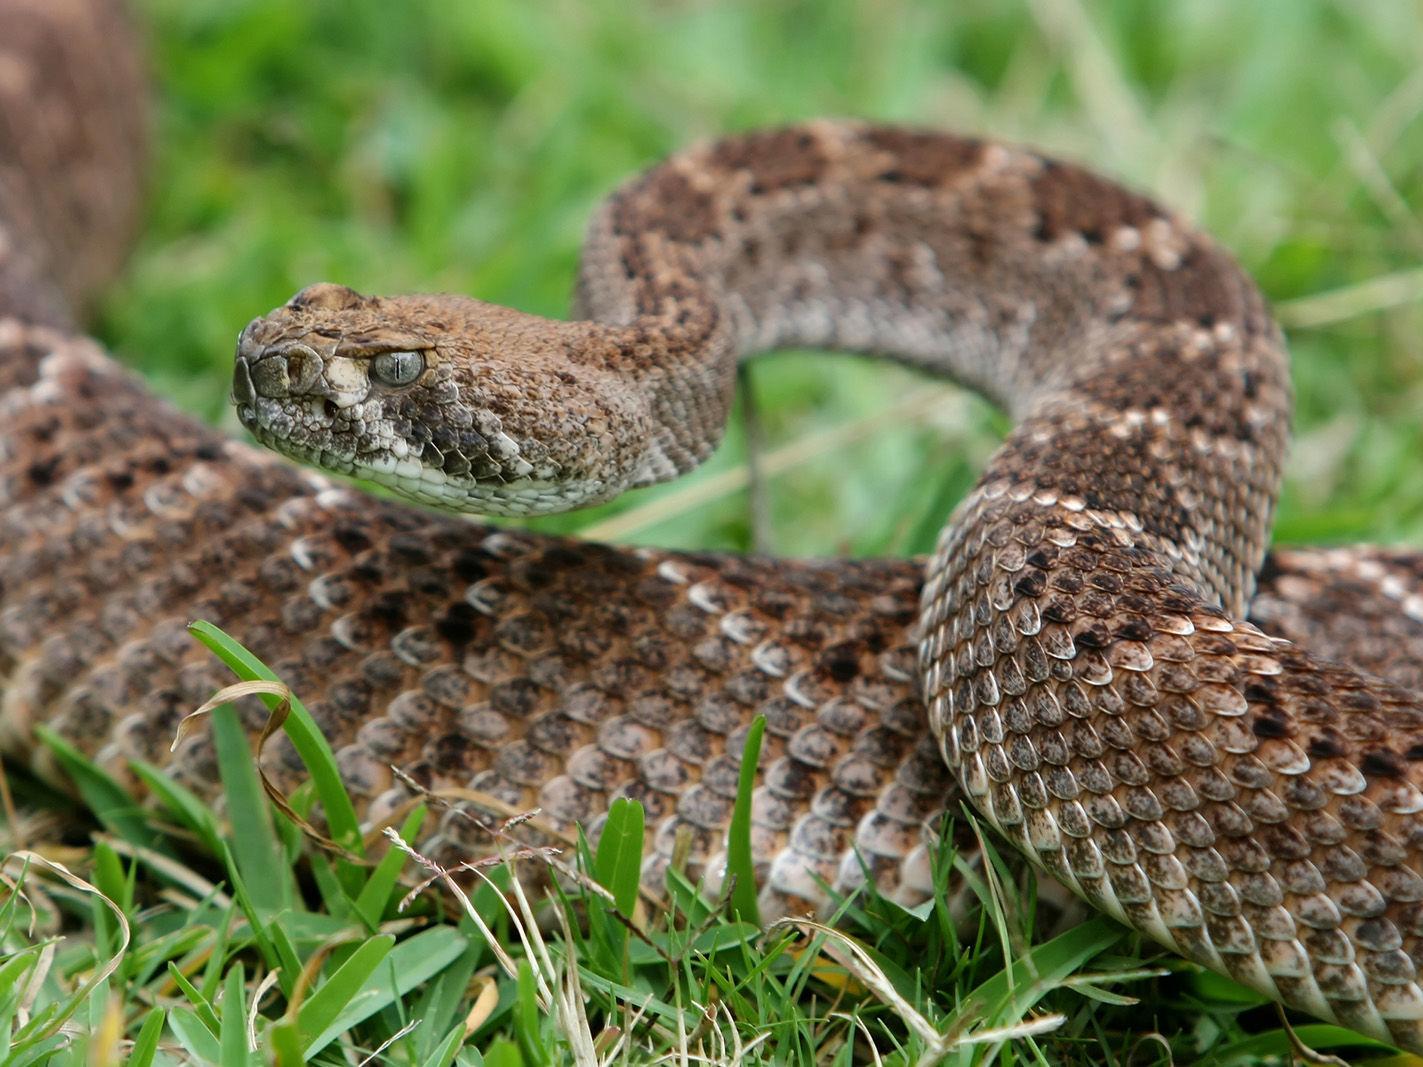 7 Countries With the Most Rattlesnake Sightings